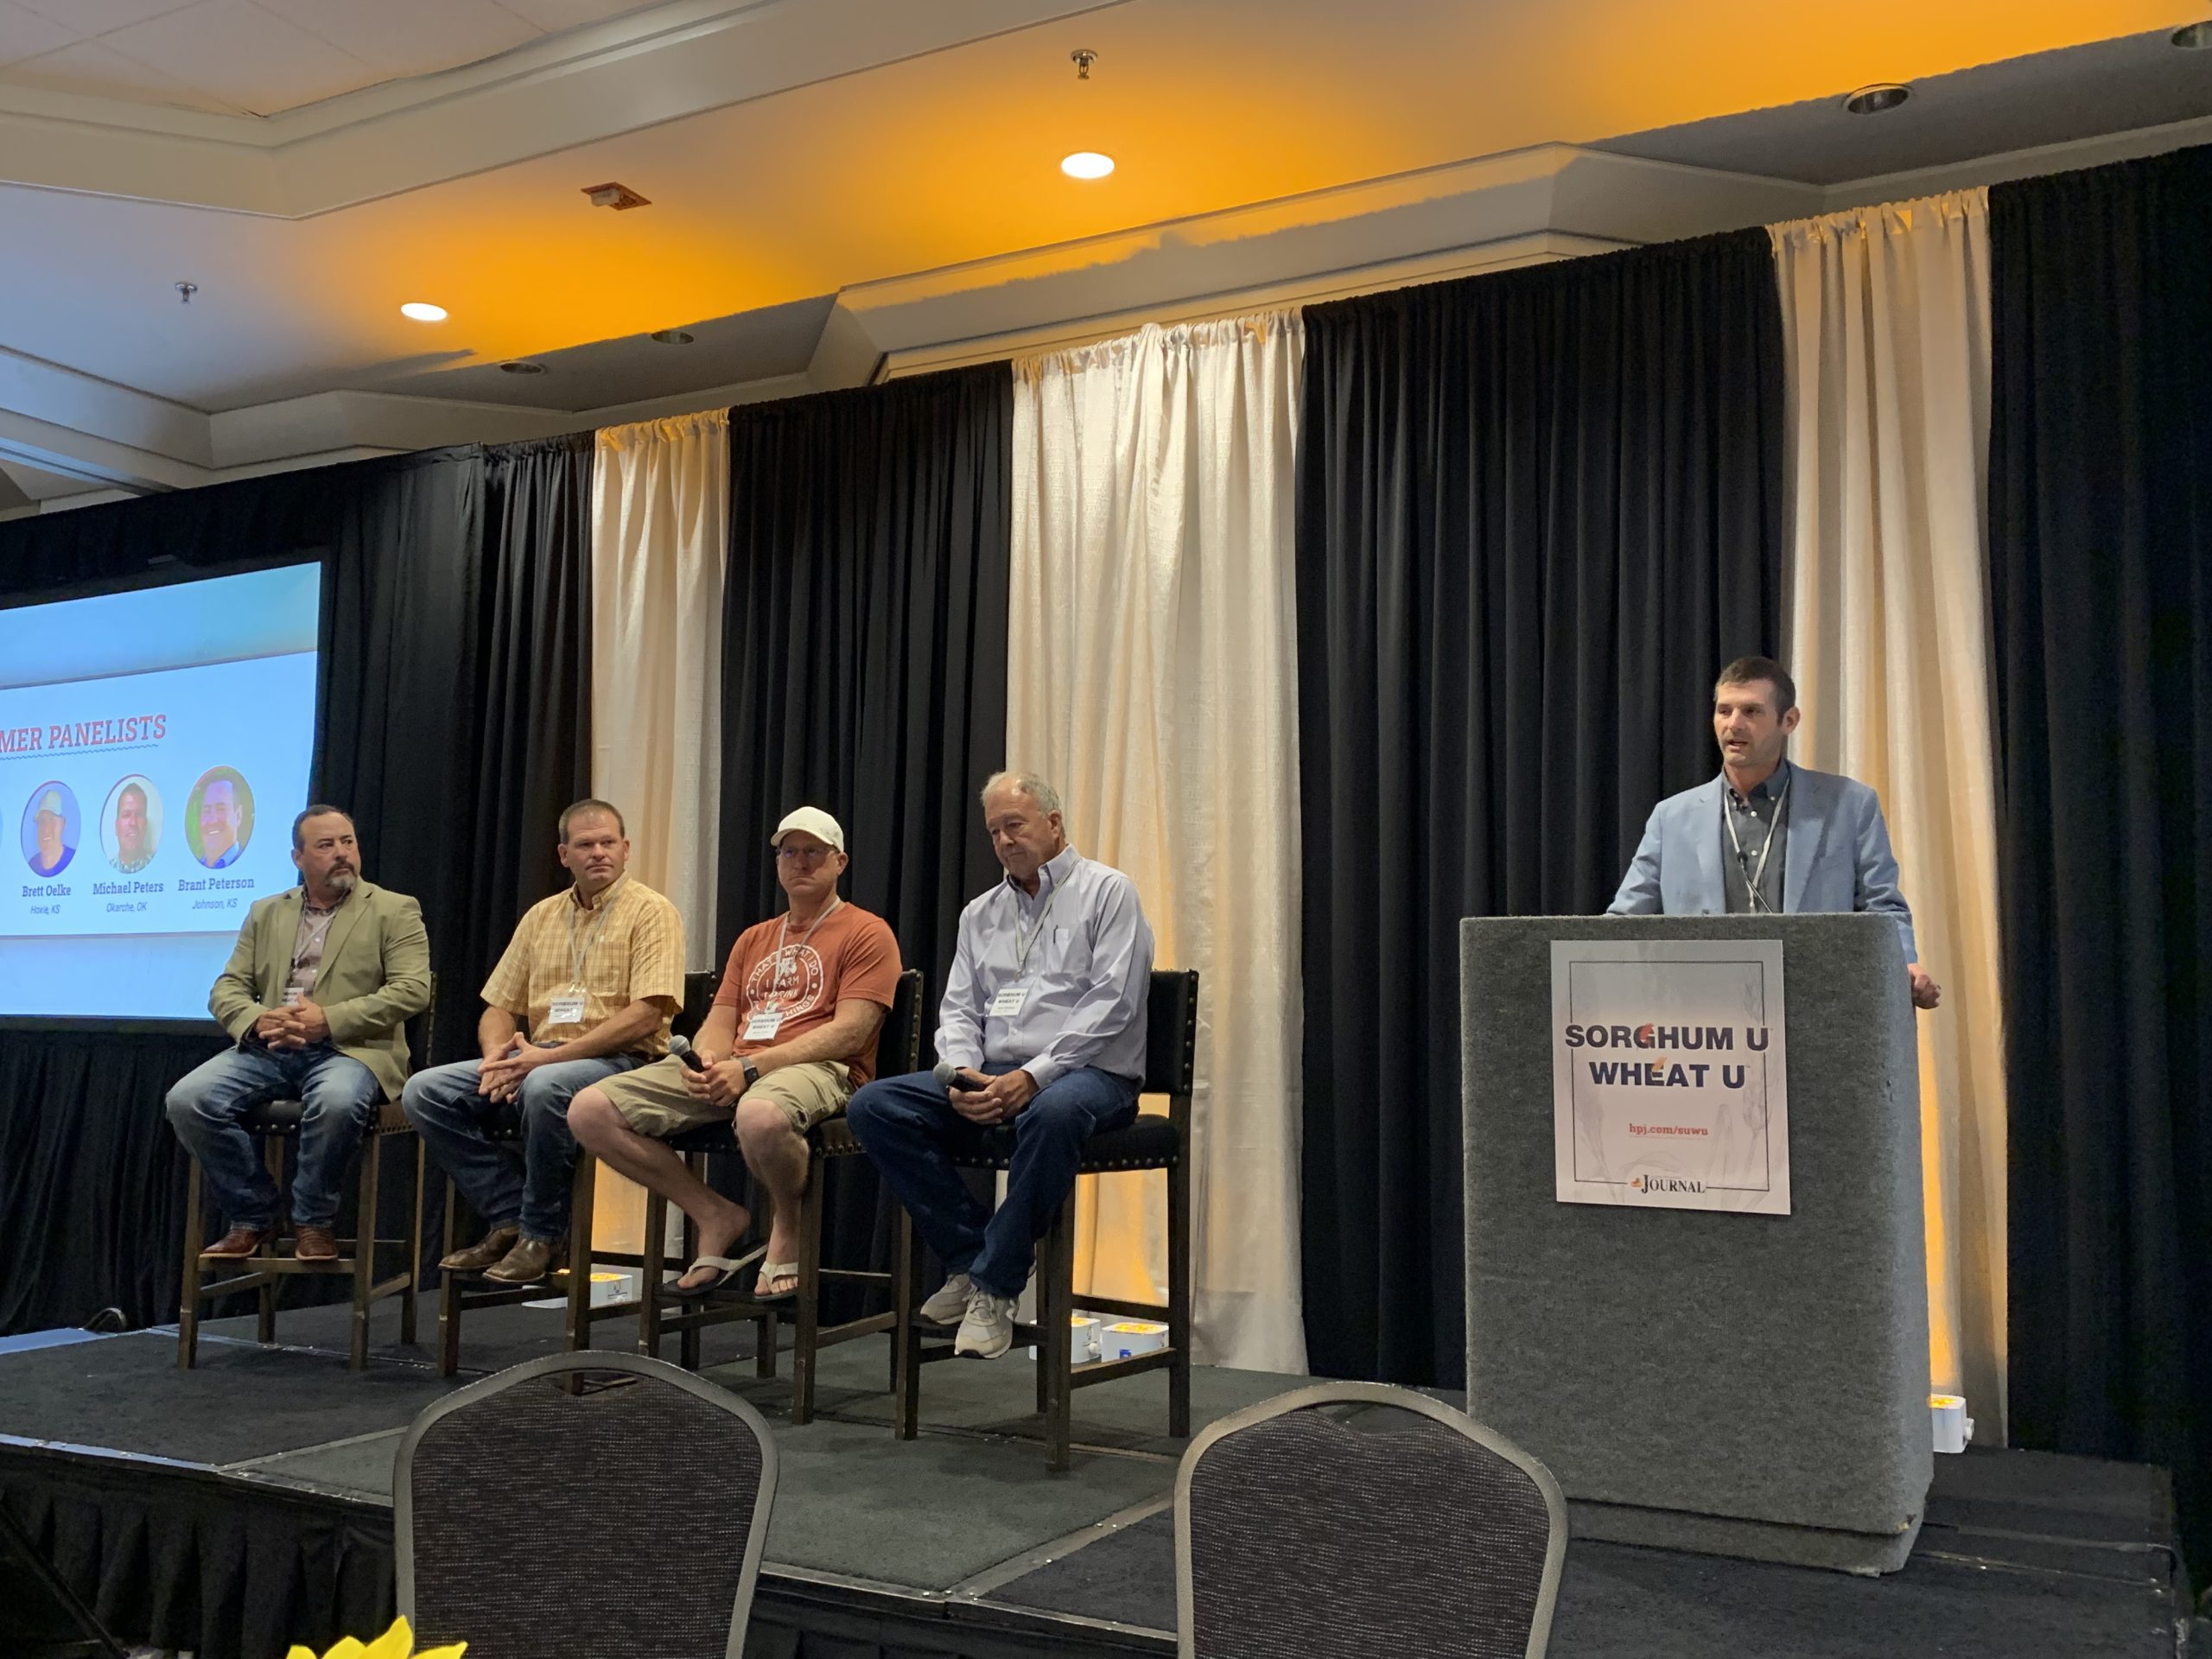 The farmer panel at Sorghum U Wheat U included moderator Craig Meeker and panelists: Brant Peterson, Michael Peters, Brett Oelke and Kent Winter. (Journal photo by Lacey Vilhauer.)